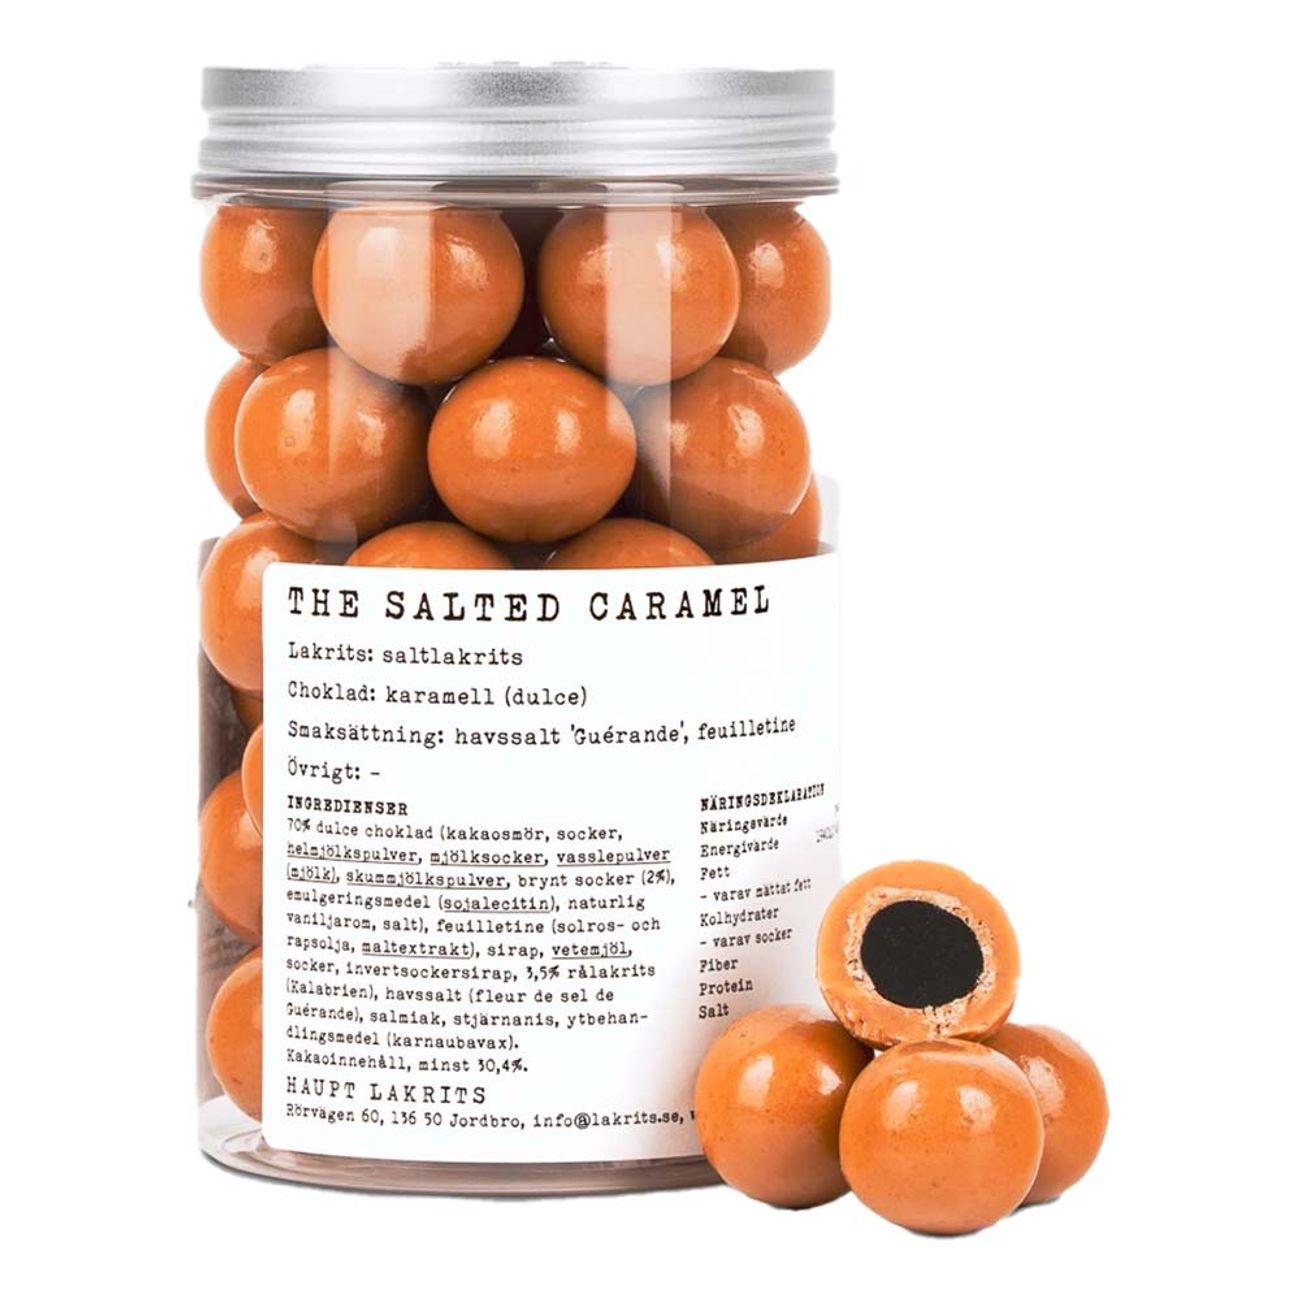 haupt-lakrits-the-salted-caramel-95934-1